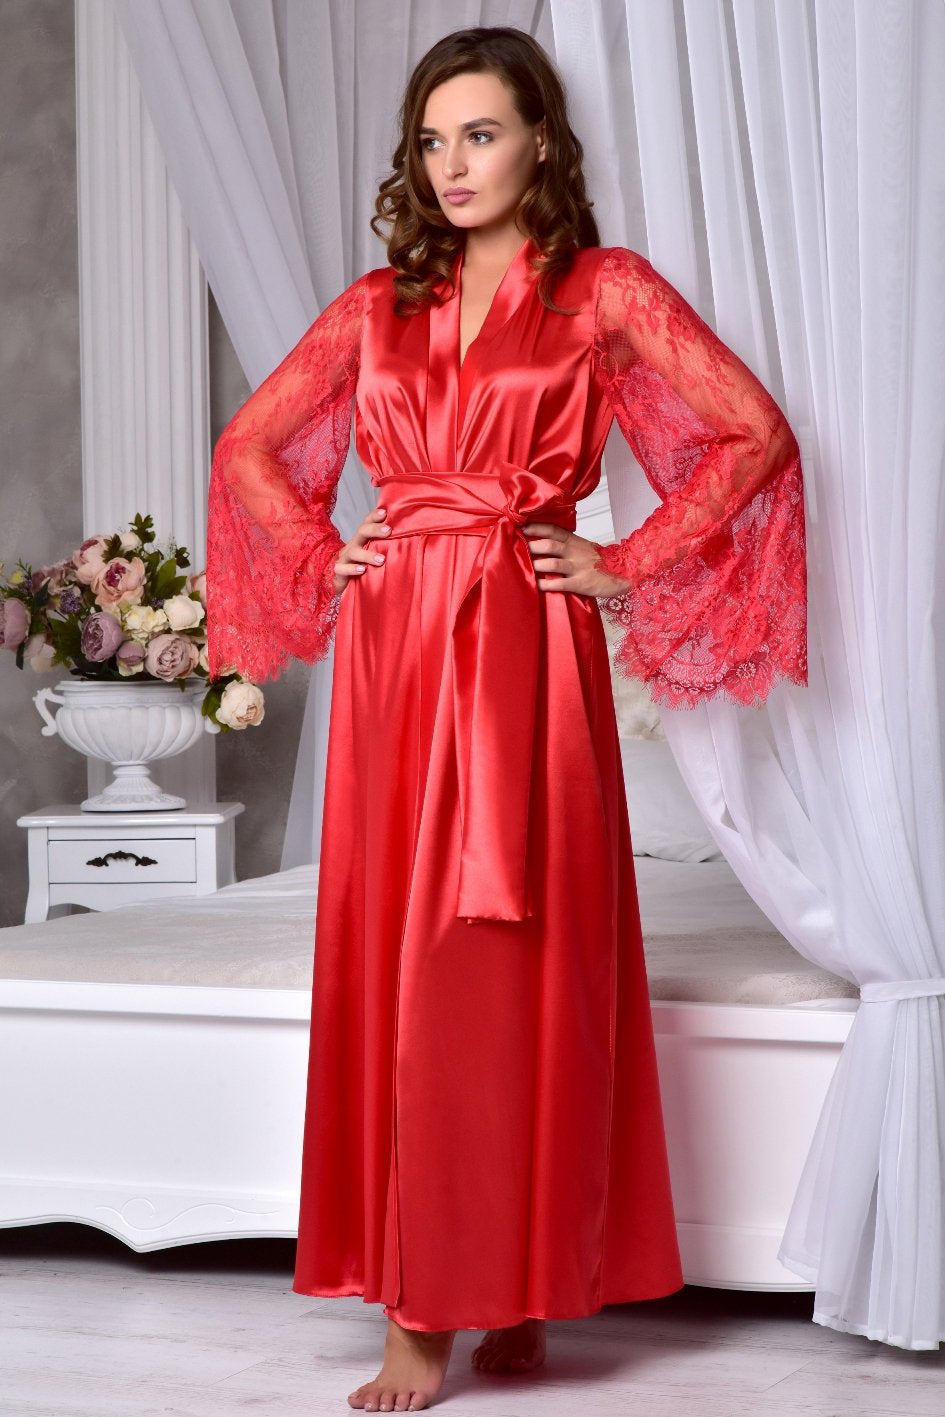 Plus Size Model Wearing Red Bridal Robe - Bridesmaids Edition